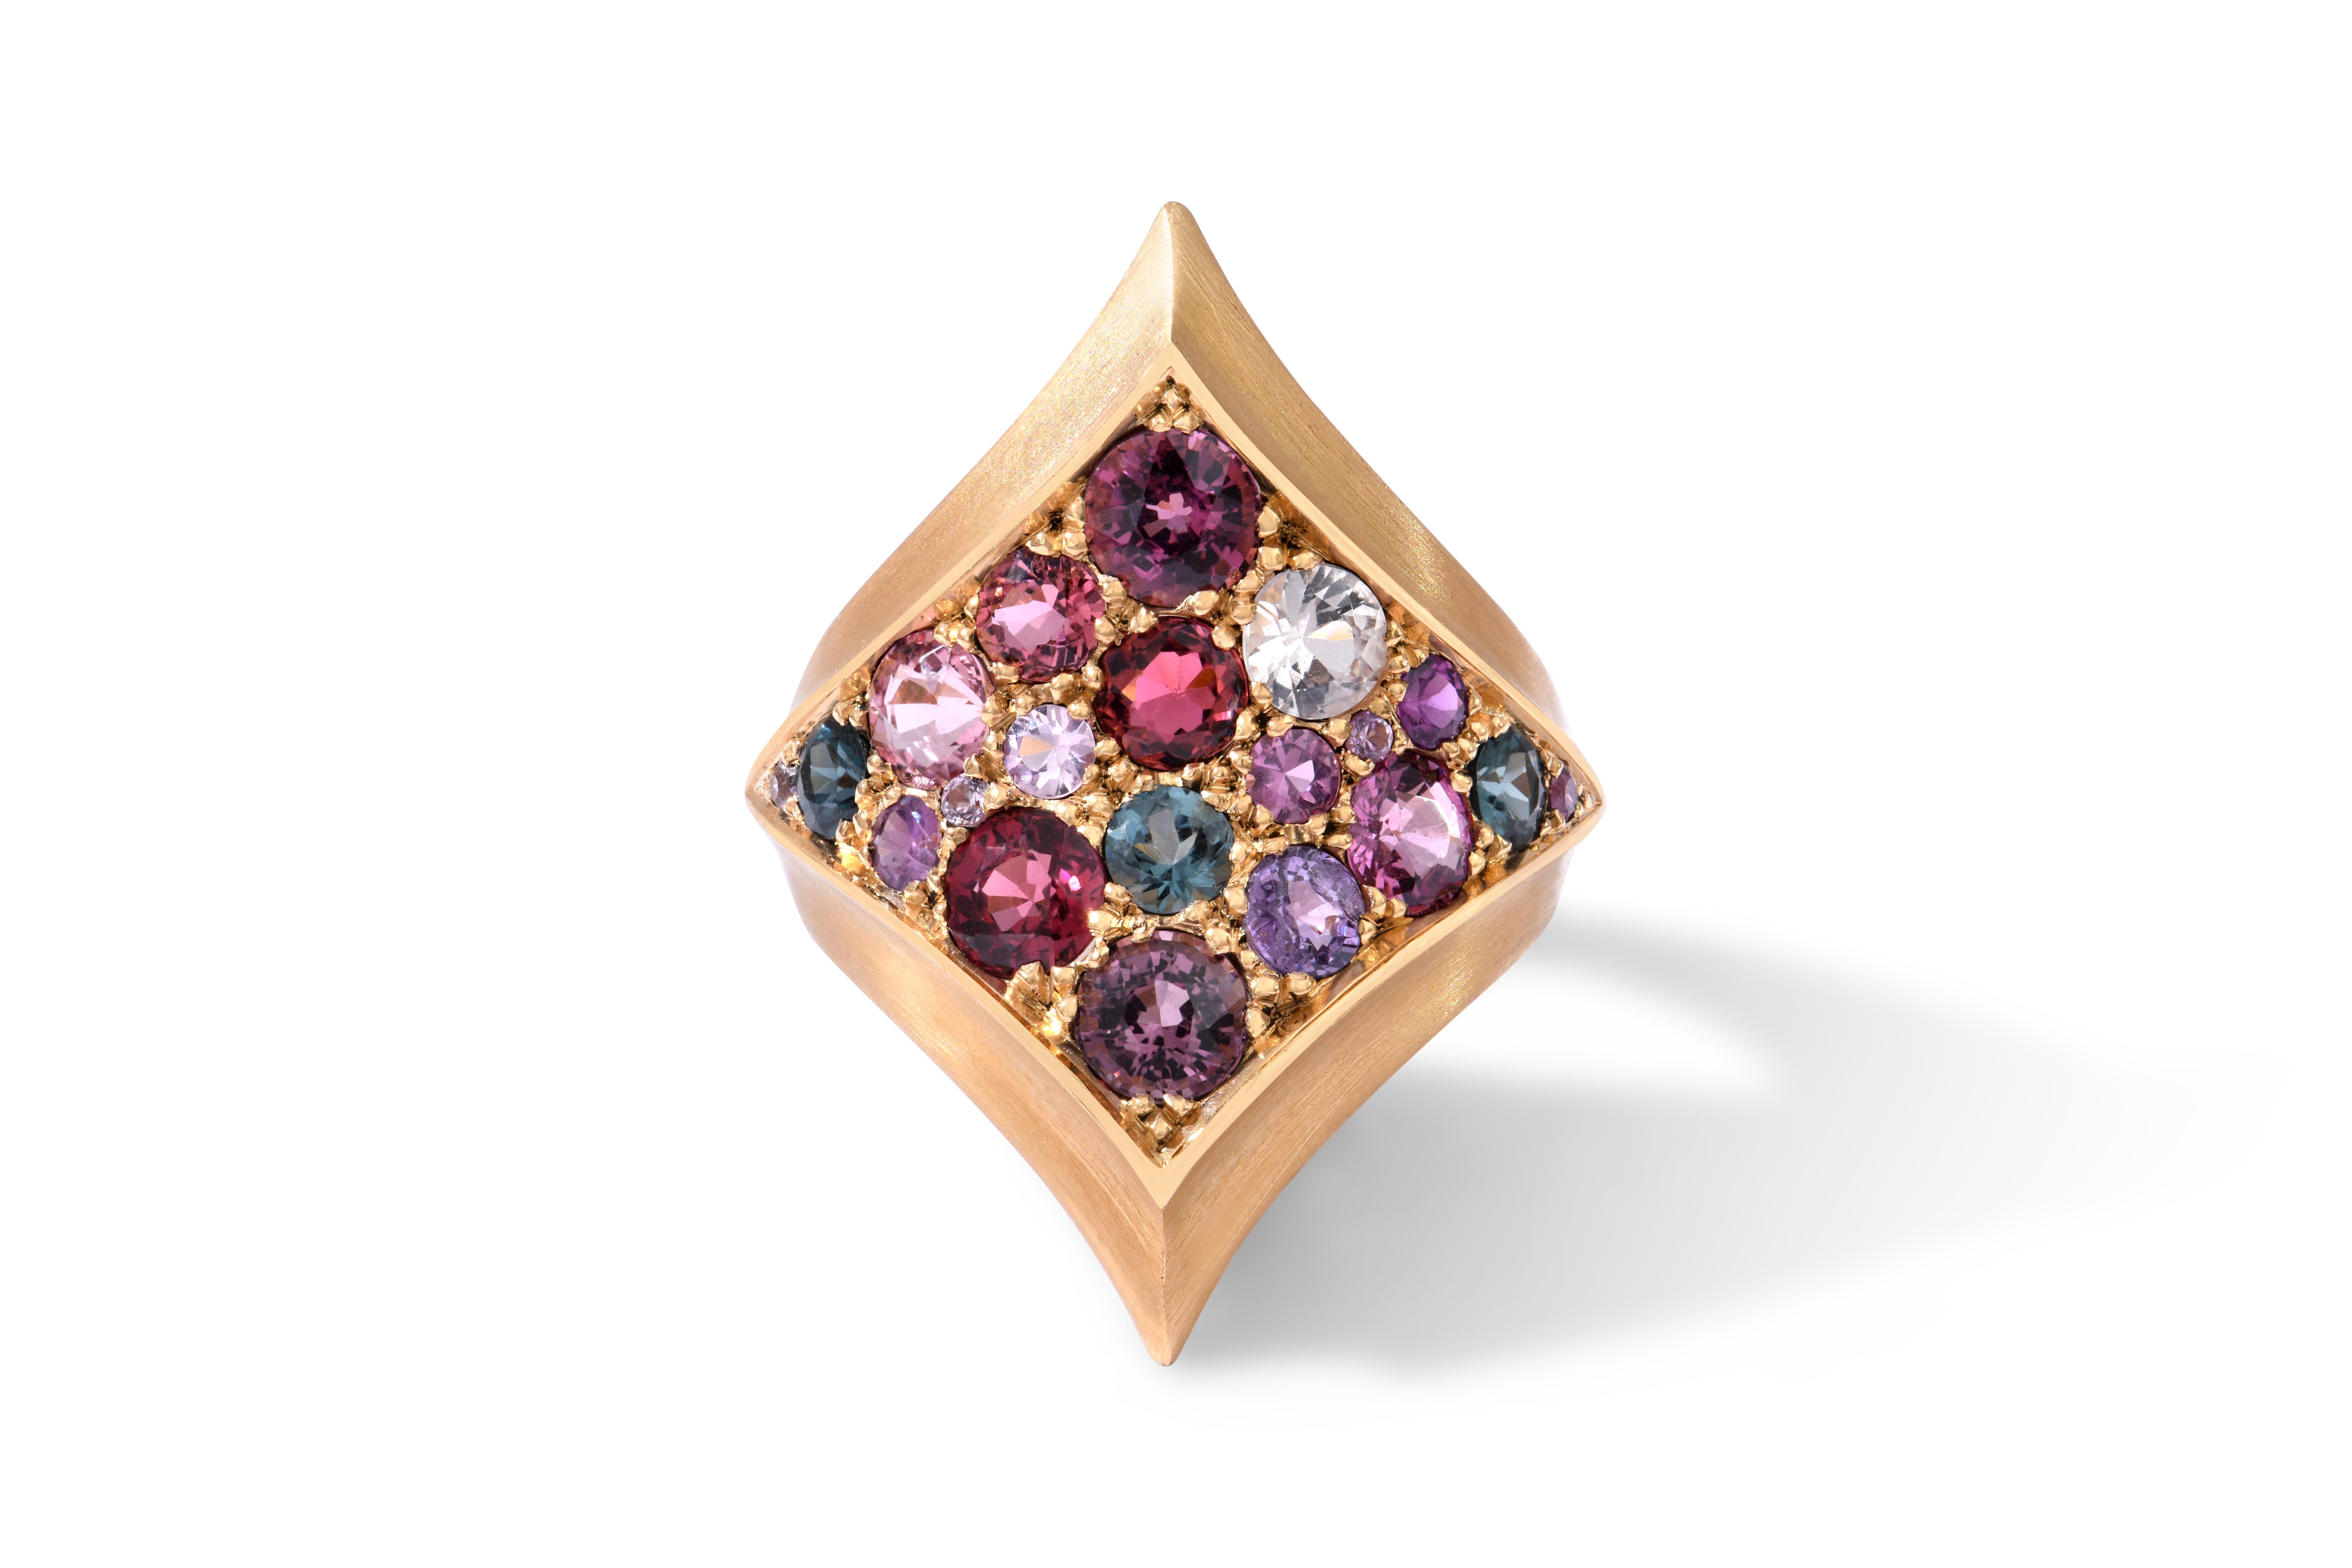 This ring aims to embody its wearer, and inspire a feeling of empowerment thanks to its shield shape. It invites you to strongly defend your beliefs and your values.

Made of 18k recycled gold, spinels, tourmalines, garnets, and sapphires.

Size 52.
